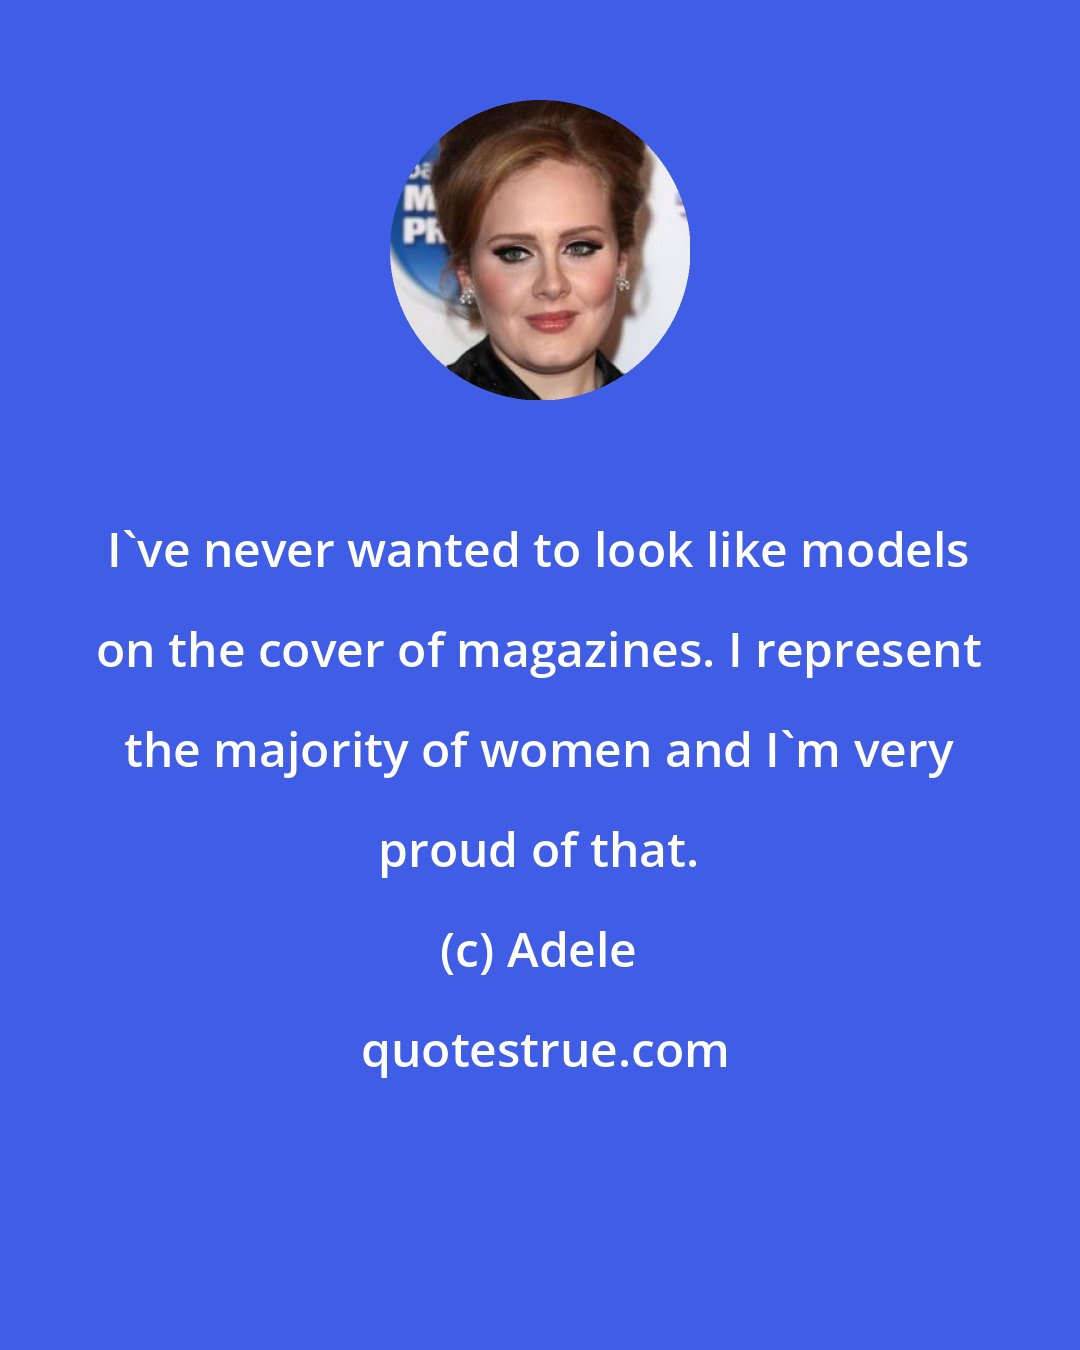 Adele: I've never wanted to look like models on the cover of magazines. I represent the majority of women and I'm very proud of that.